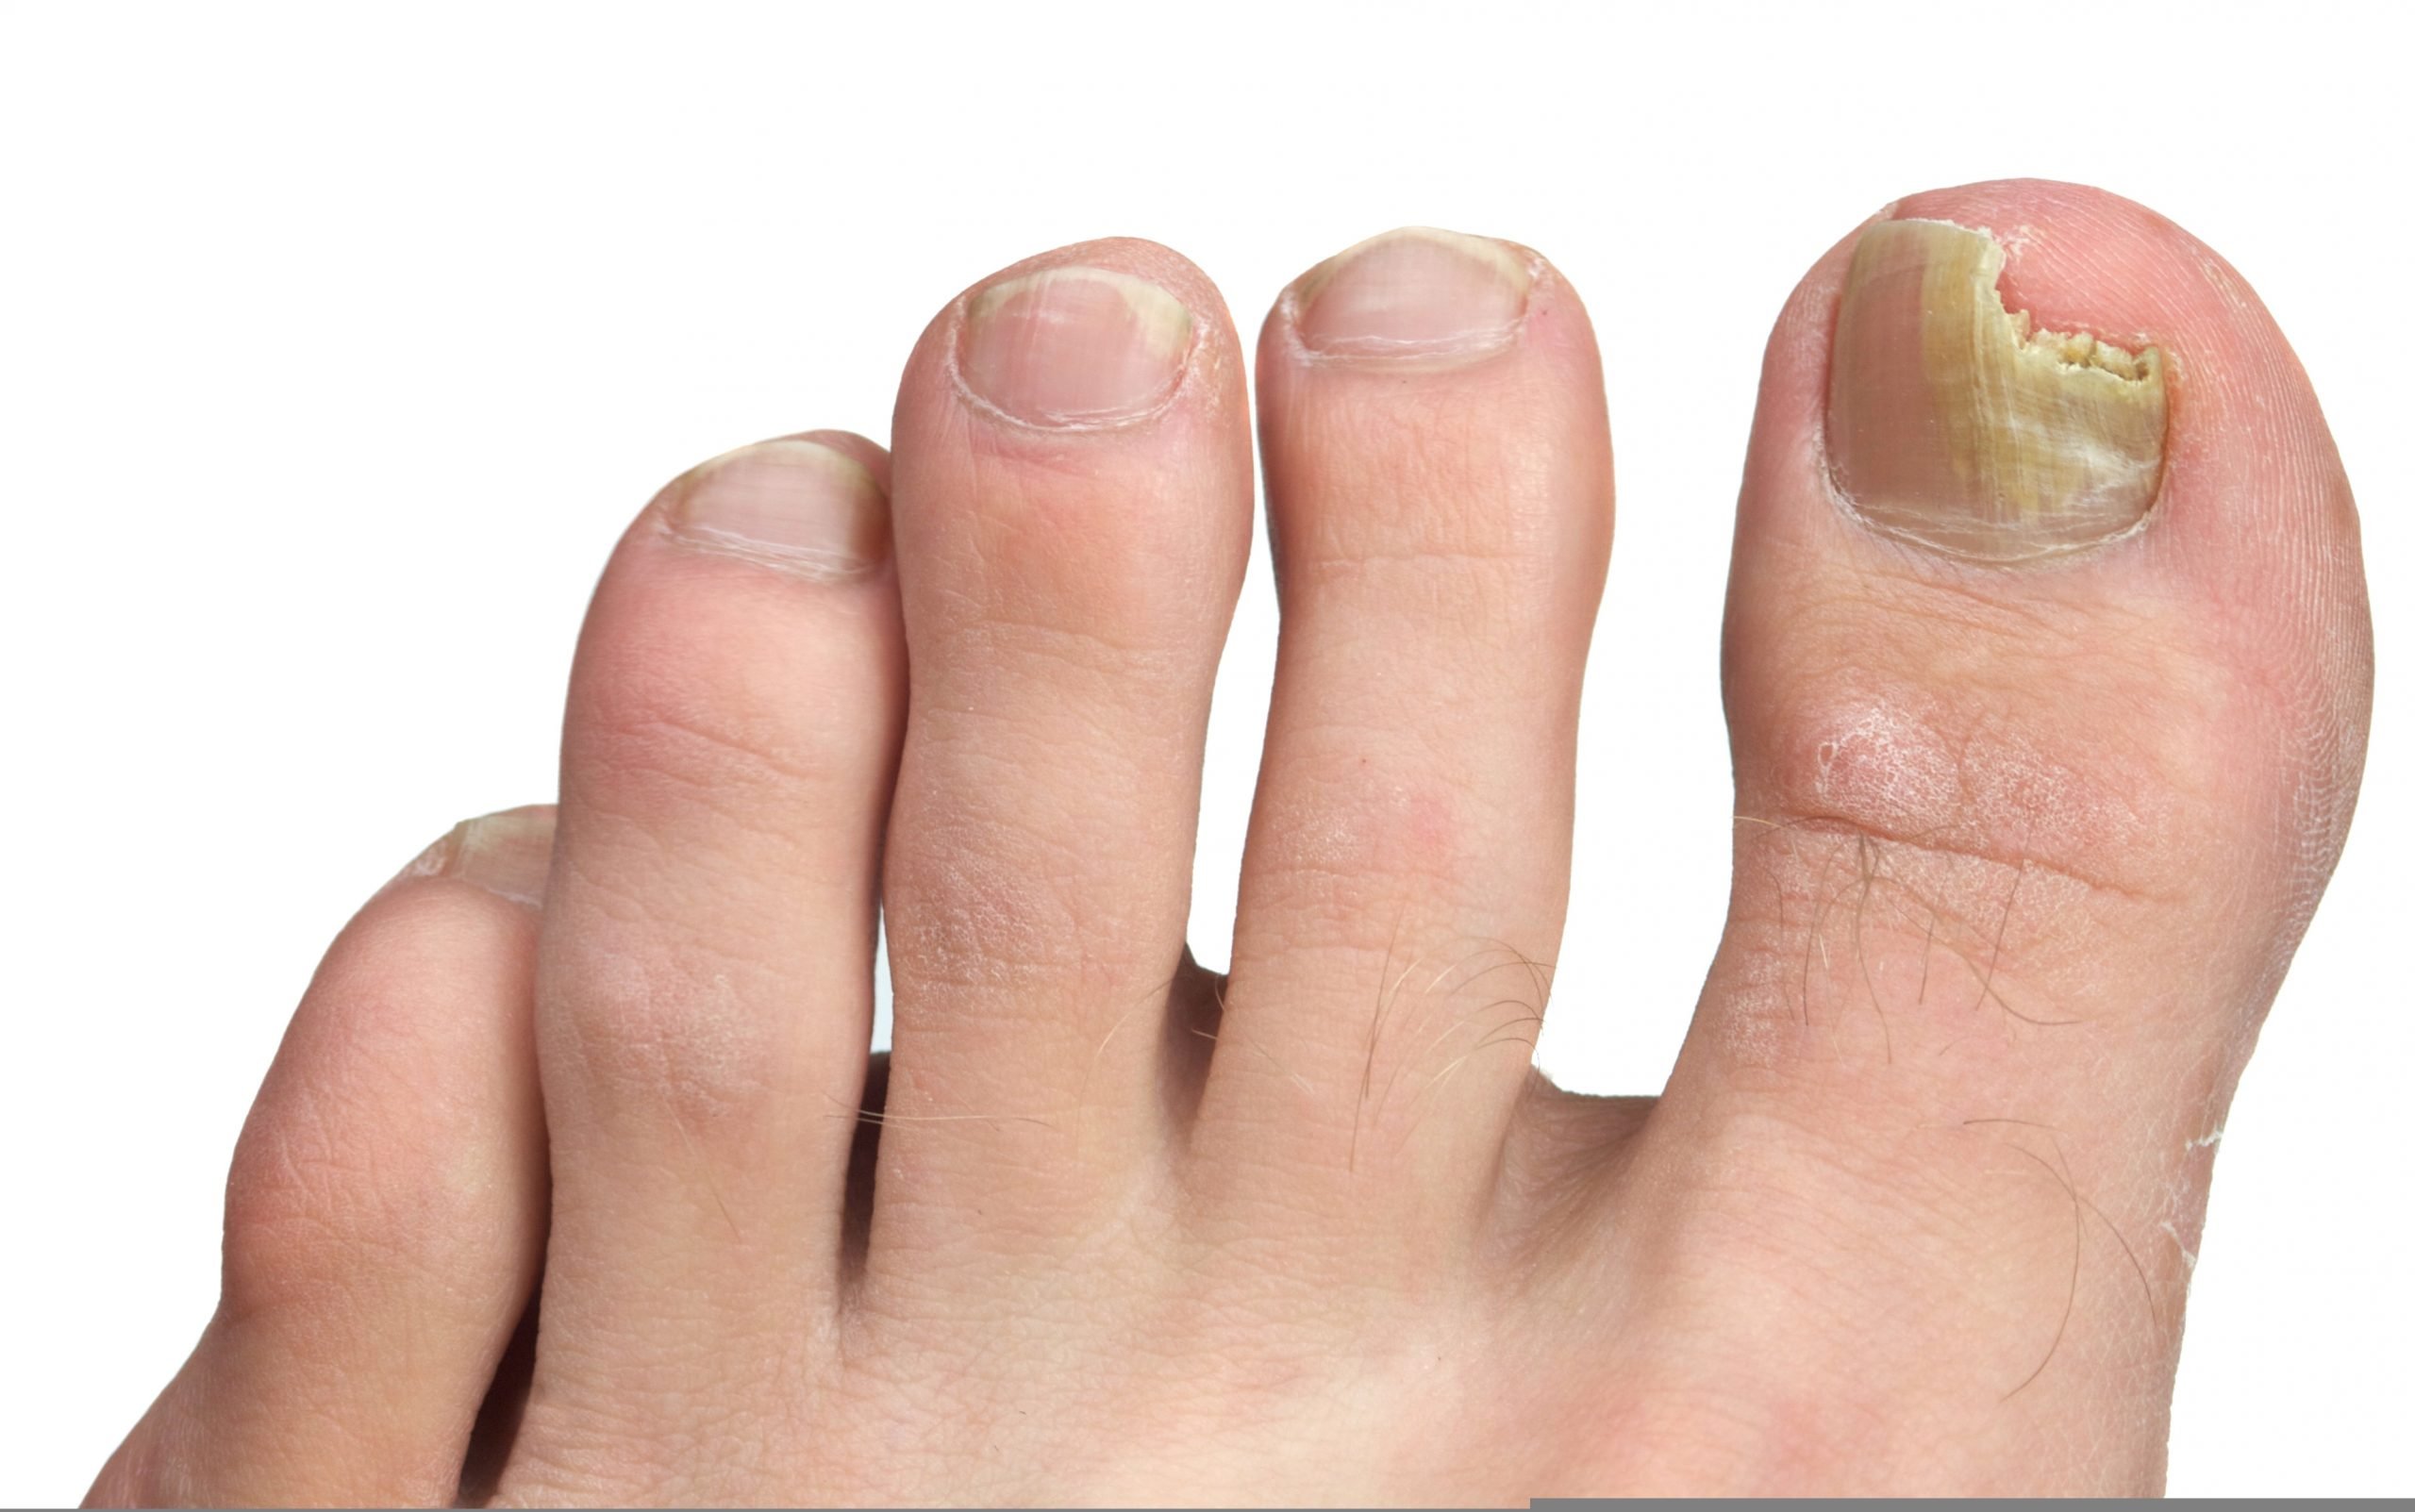 Nail Fungus an infection to be treated